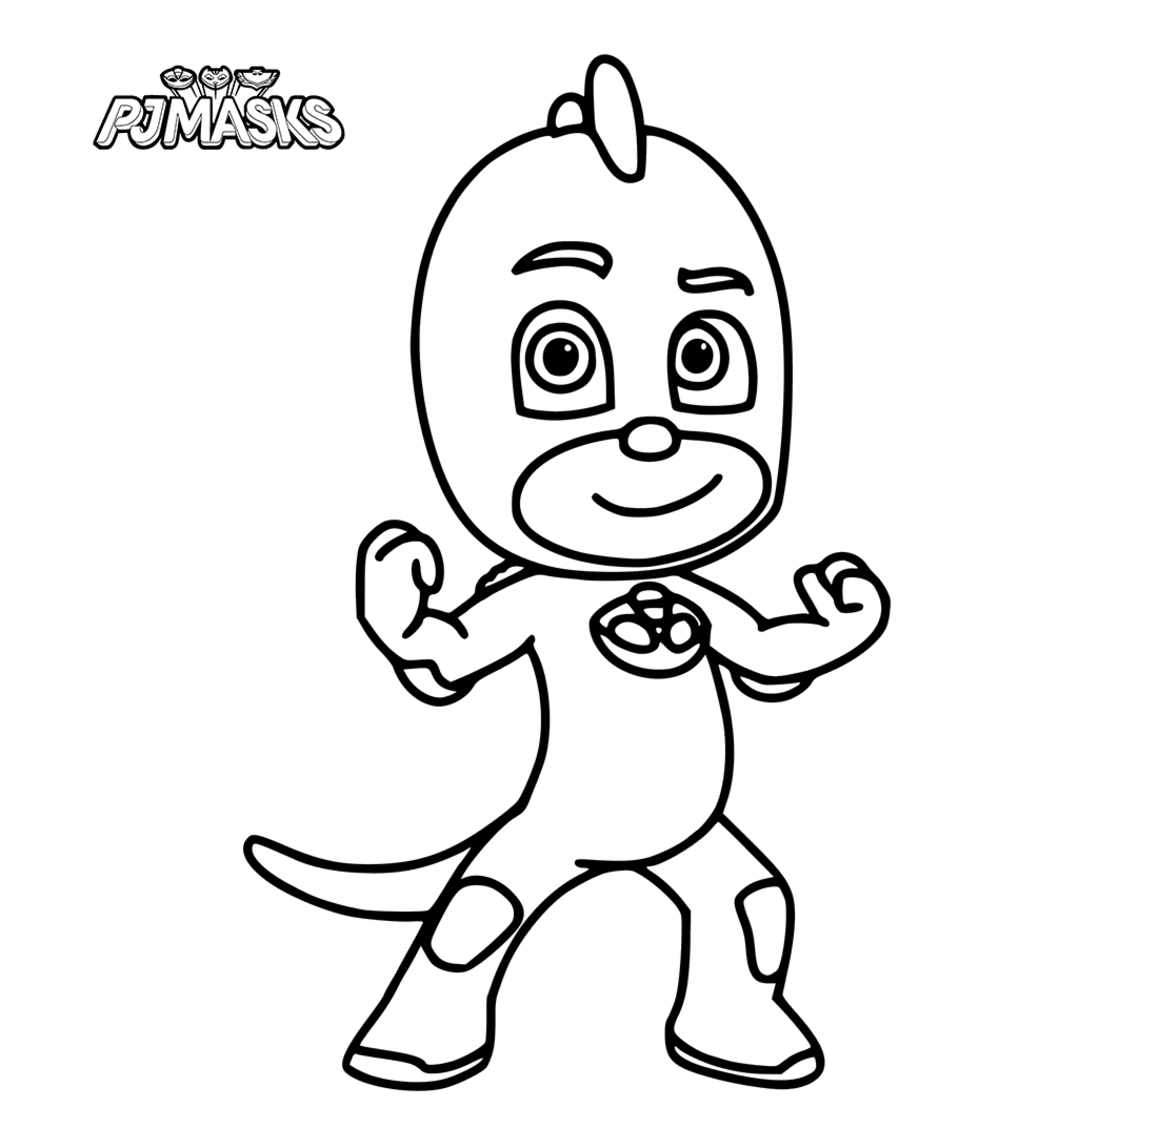 Finding Dory coloring pages coloring pages to and print for free